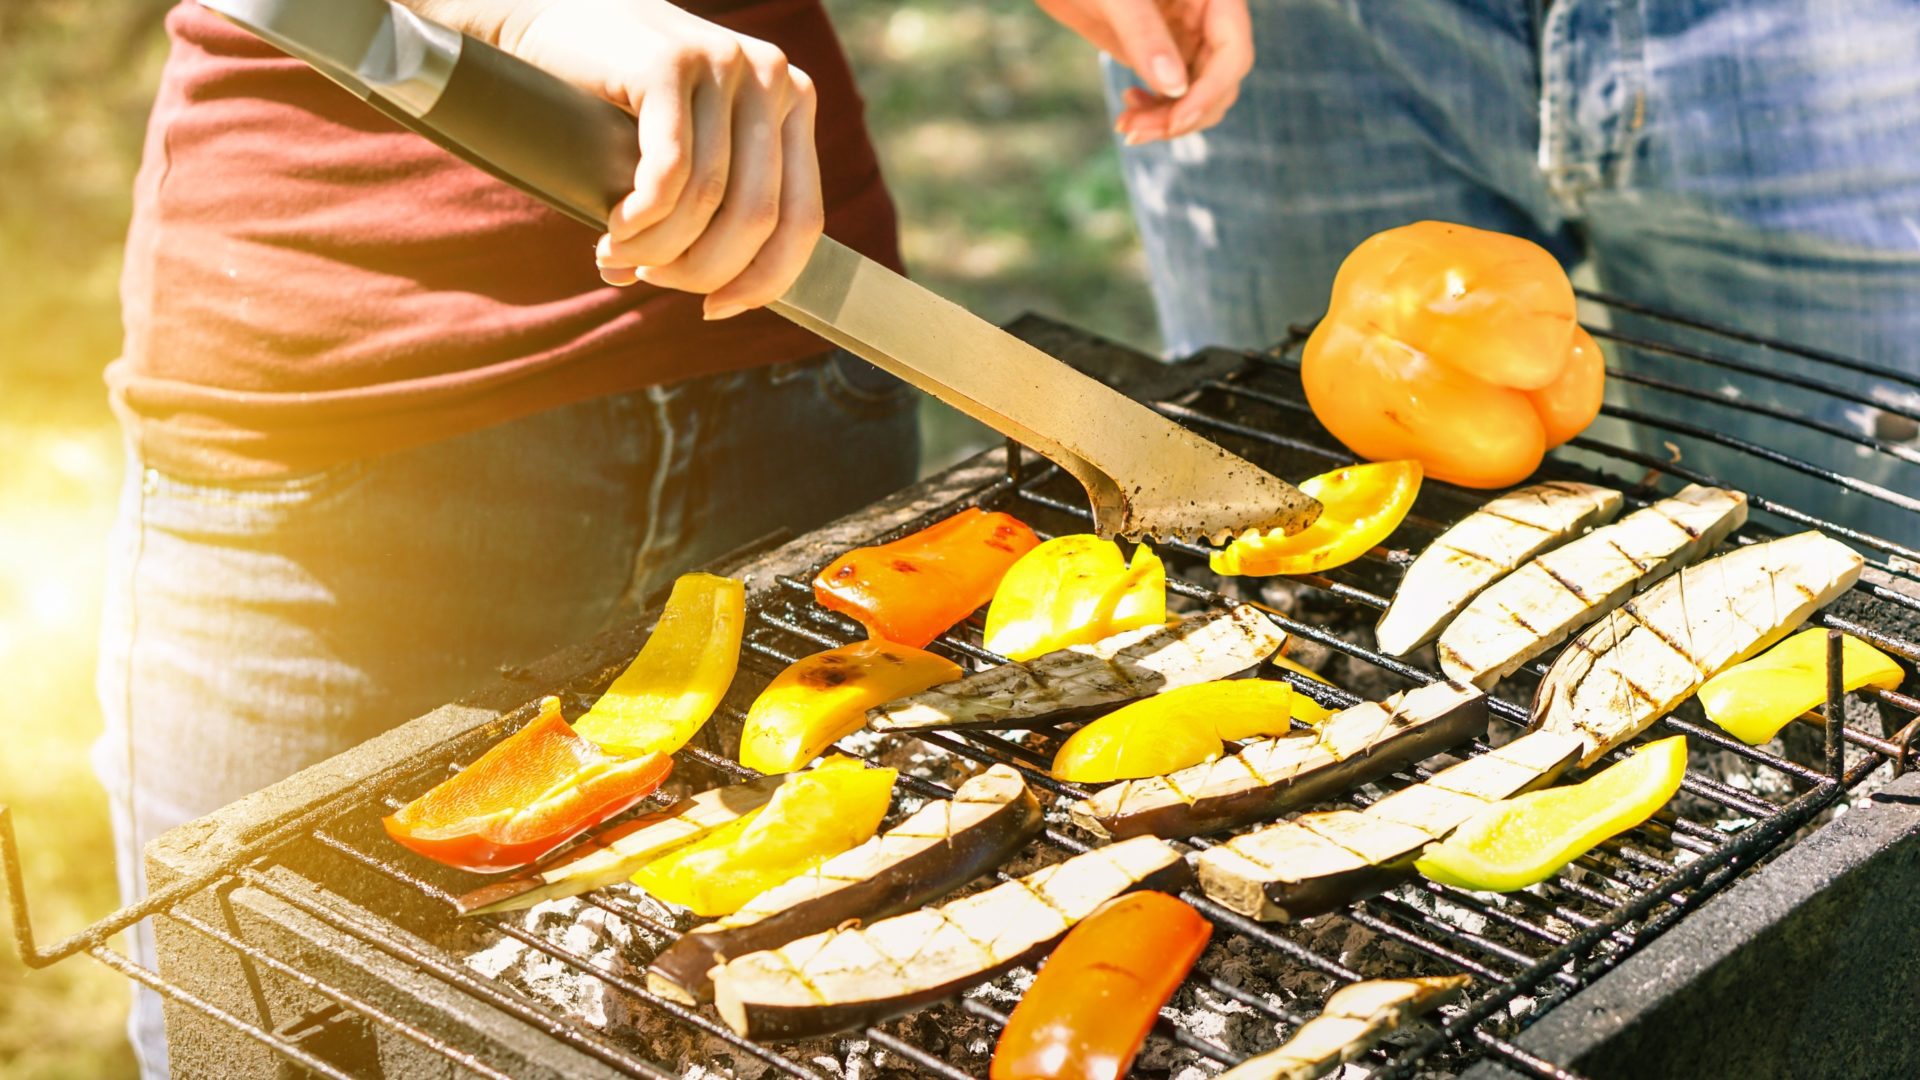 How To Grill Vegetables